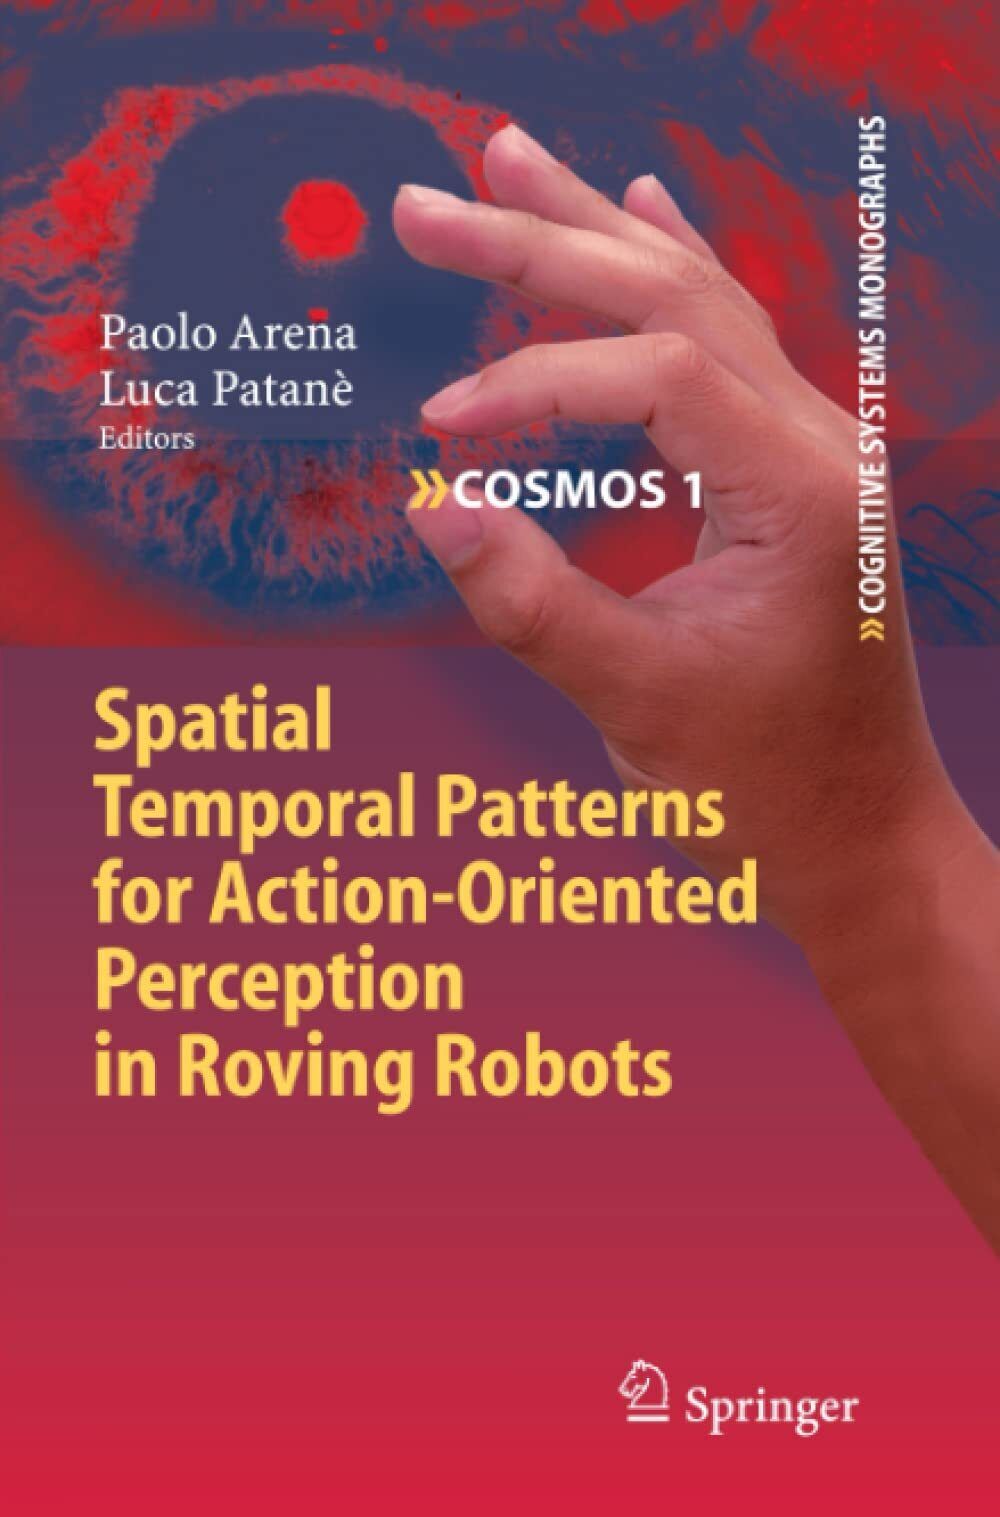 Spatial Temporal Patterns for Action-Oriented Perception in Roving Robots - 2010